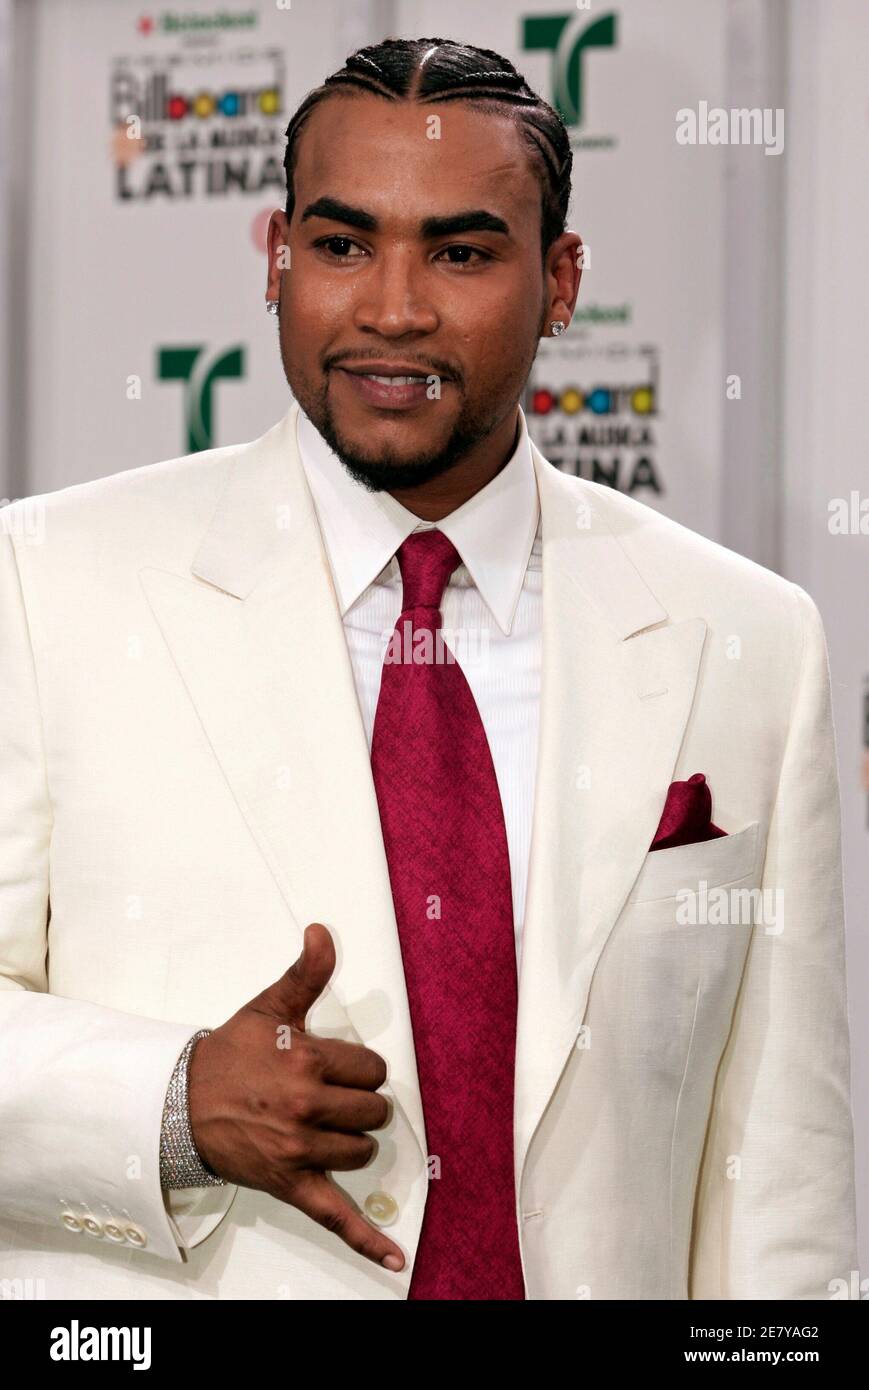 William Omar Landron of Puerto Rico, a Latin Grammy Award-nominated  reggaeton singer/rapper, who is also known as Don Omar, arrives at the 2007  Billboard Latin Music Awards in Coral Gables, Florida April